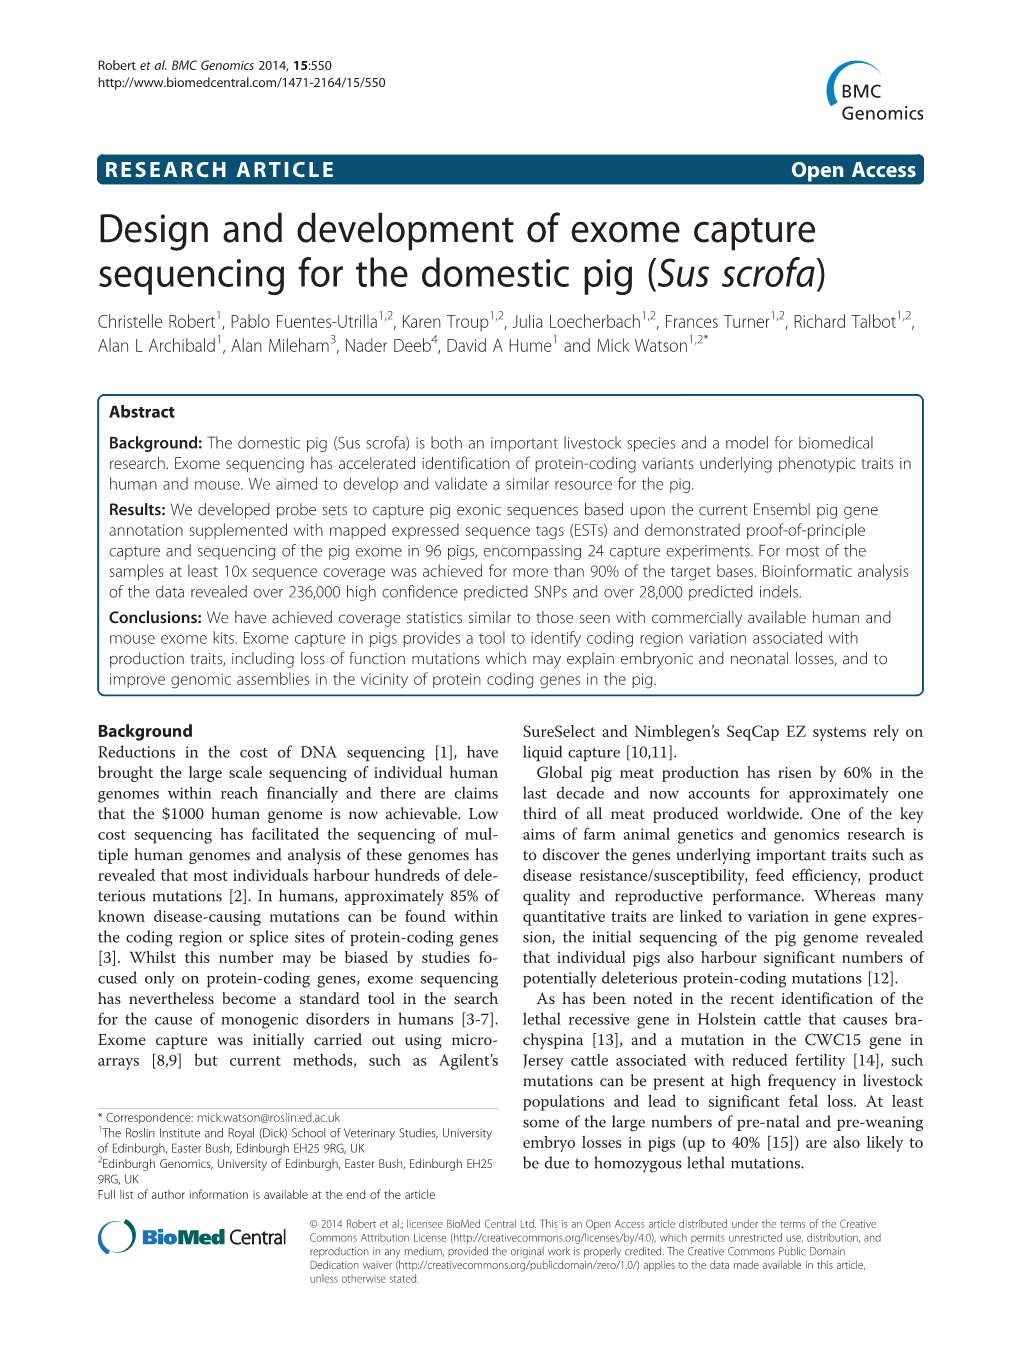 Design and Development of Exome Capture Sequencing